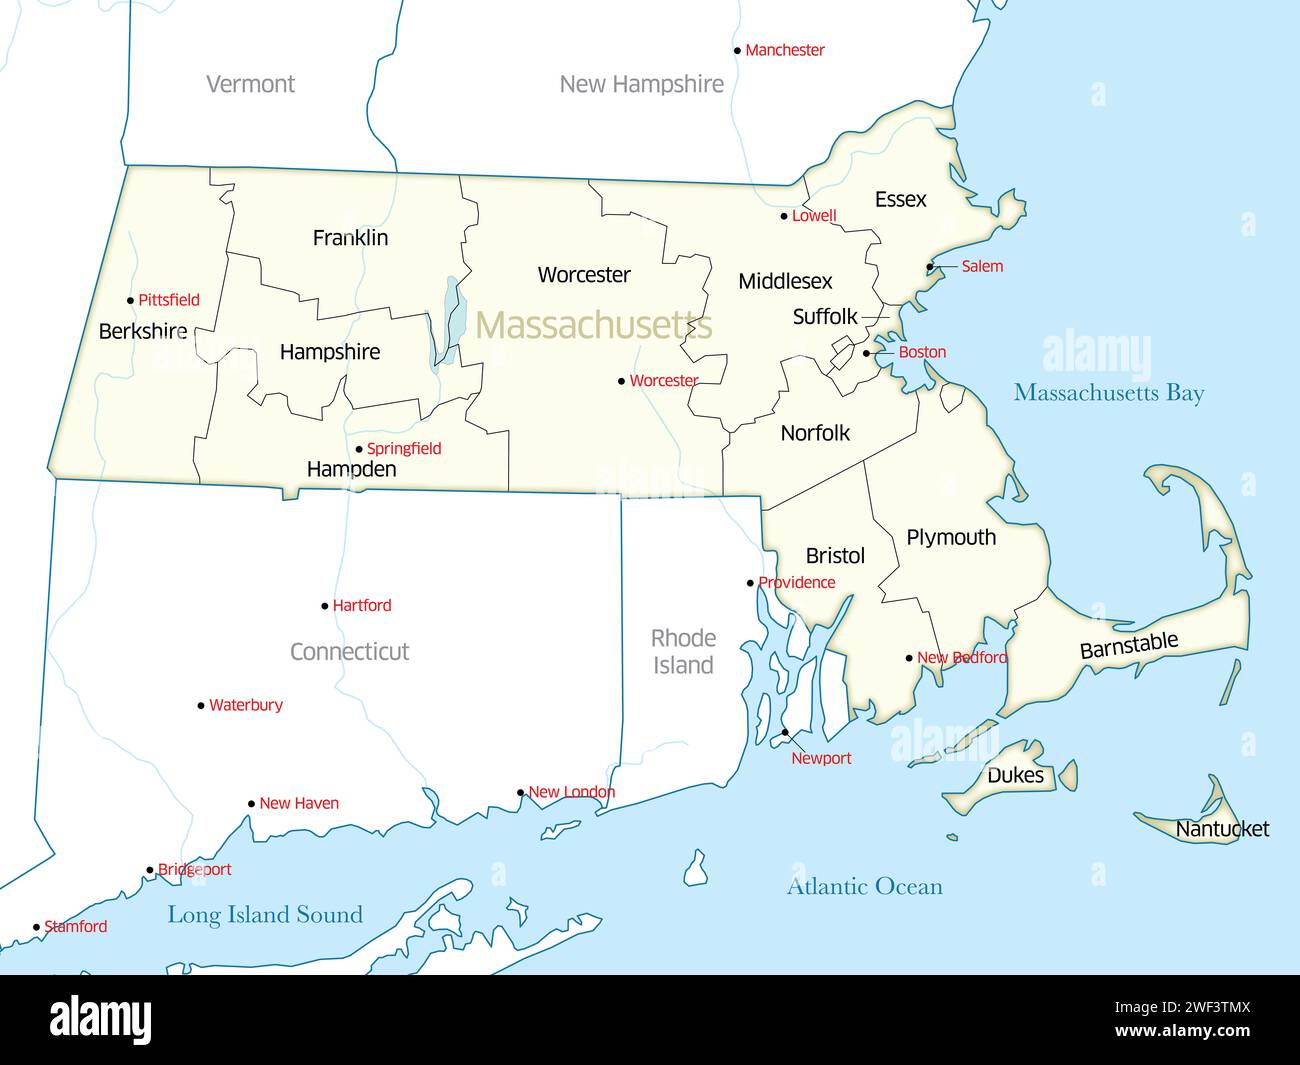 Political map showing the counties of the state of Massachusetts. Stock Photo